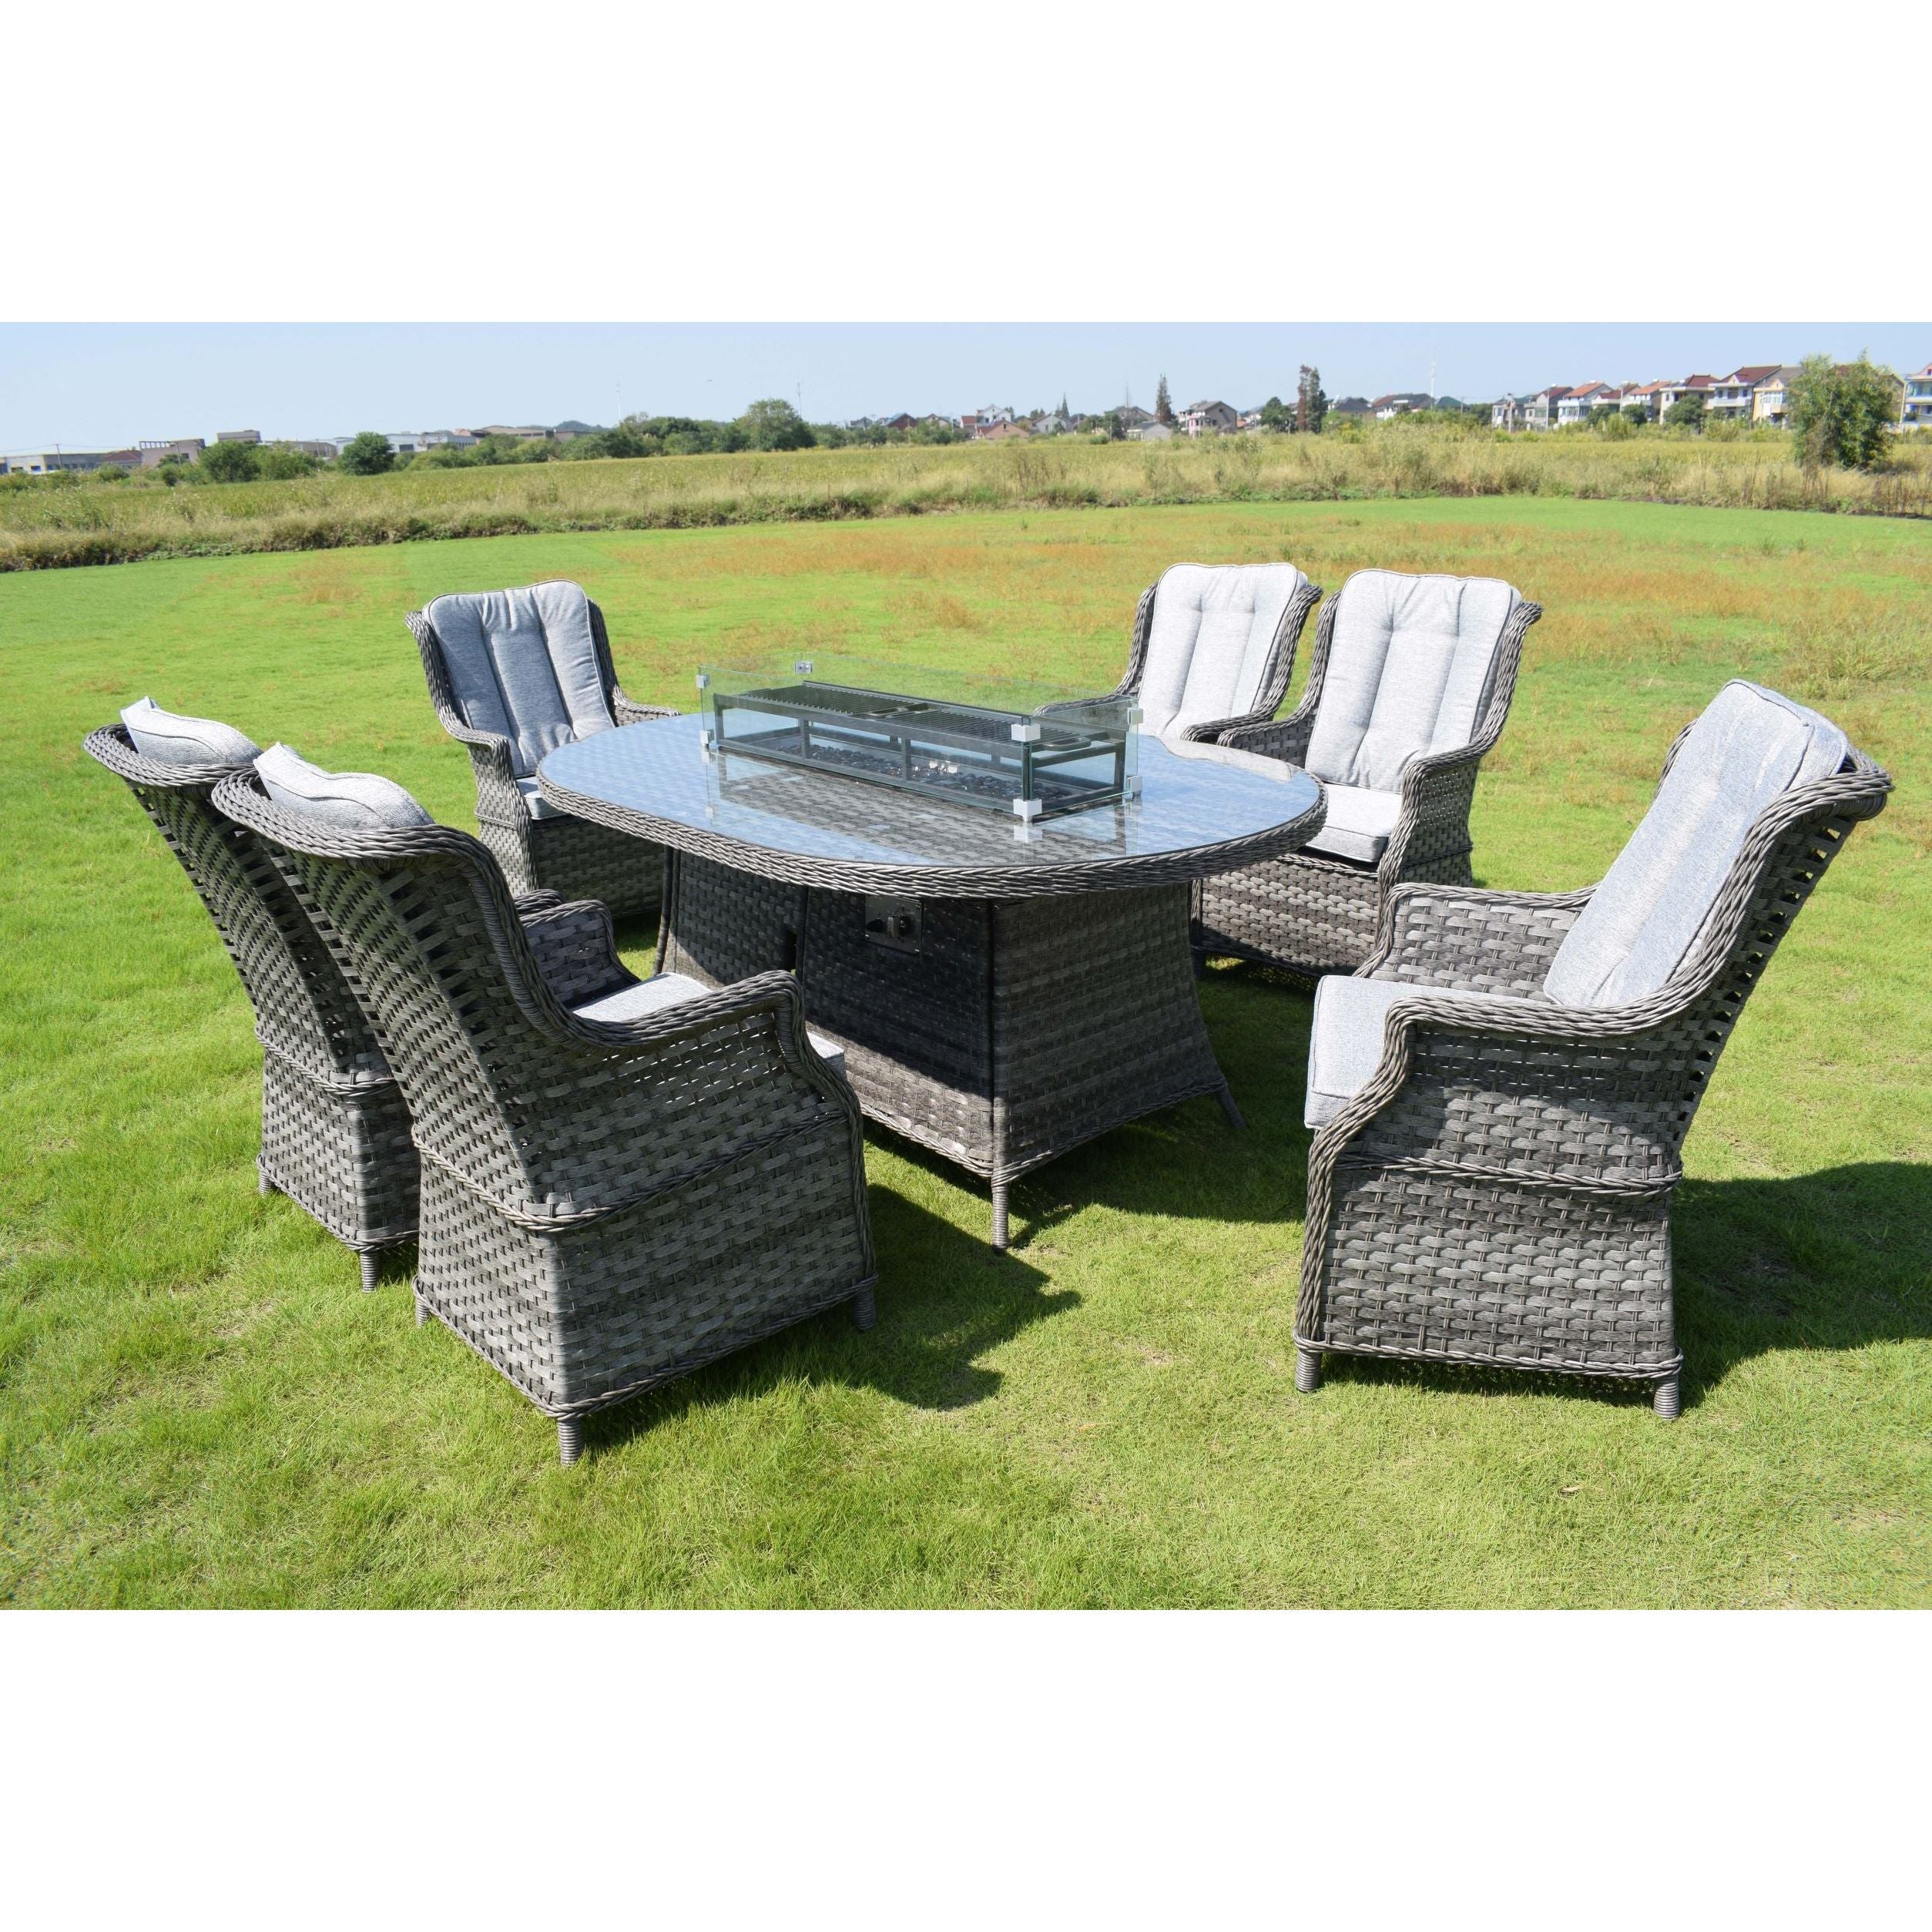 Amalfi 6 Seater Oval Dining Set with Firepit Table